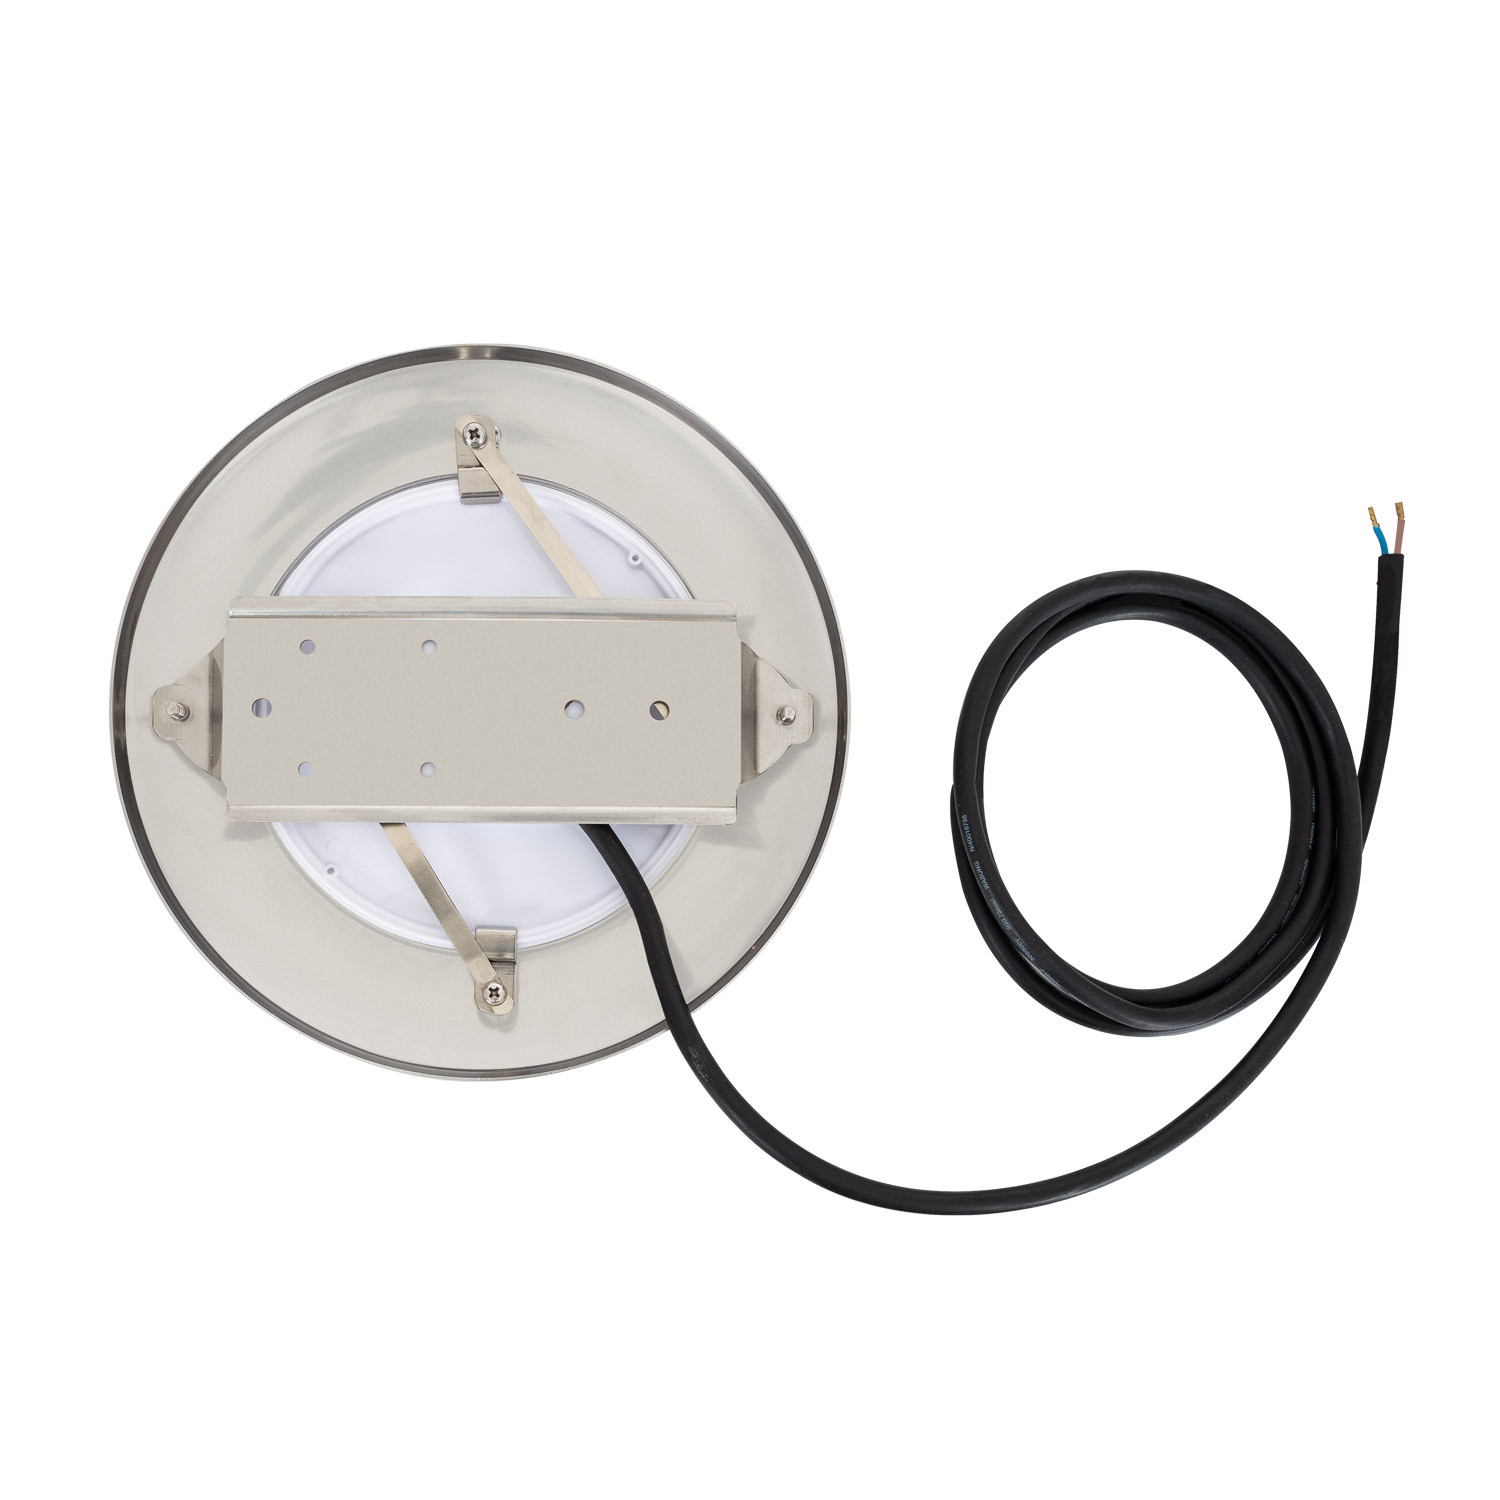 CNBRIGHTER LED Underwater Swimming Pool Lights,54W CREE Chip 12V AC,Wall Surface Mounted IP68 Waterproof,Stainless Steel,with 20ft Cord Cool White-6000K 